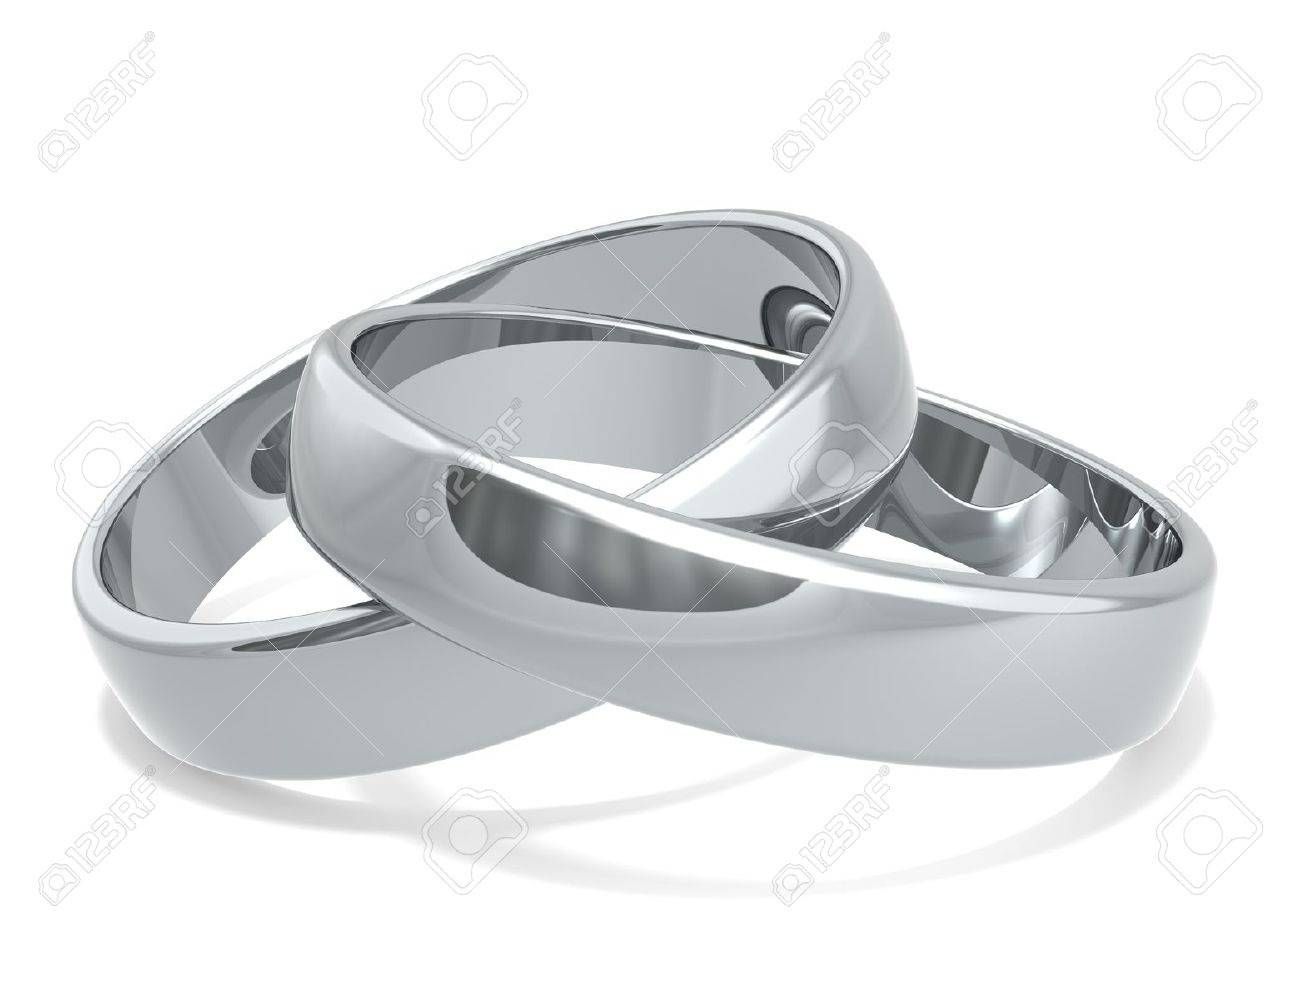 New Silver Wedding Anniversary Rings Photo Gallery – Alsayegh Intended For Most Recently Released Silver 25th Anniversary Rings (View 4 of 25)